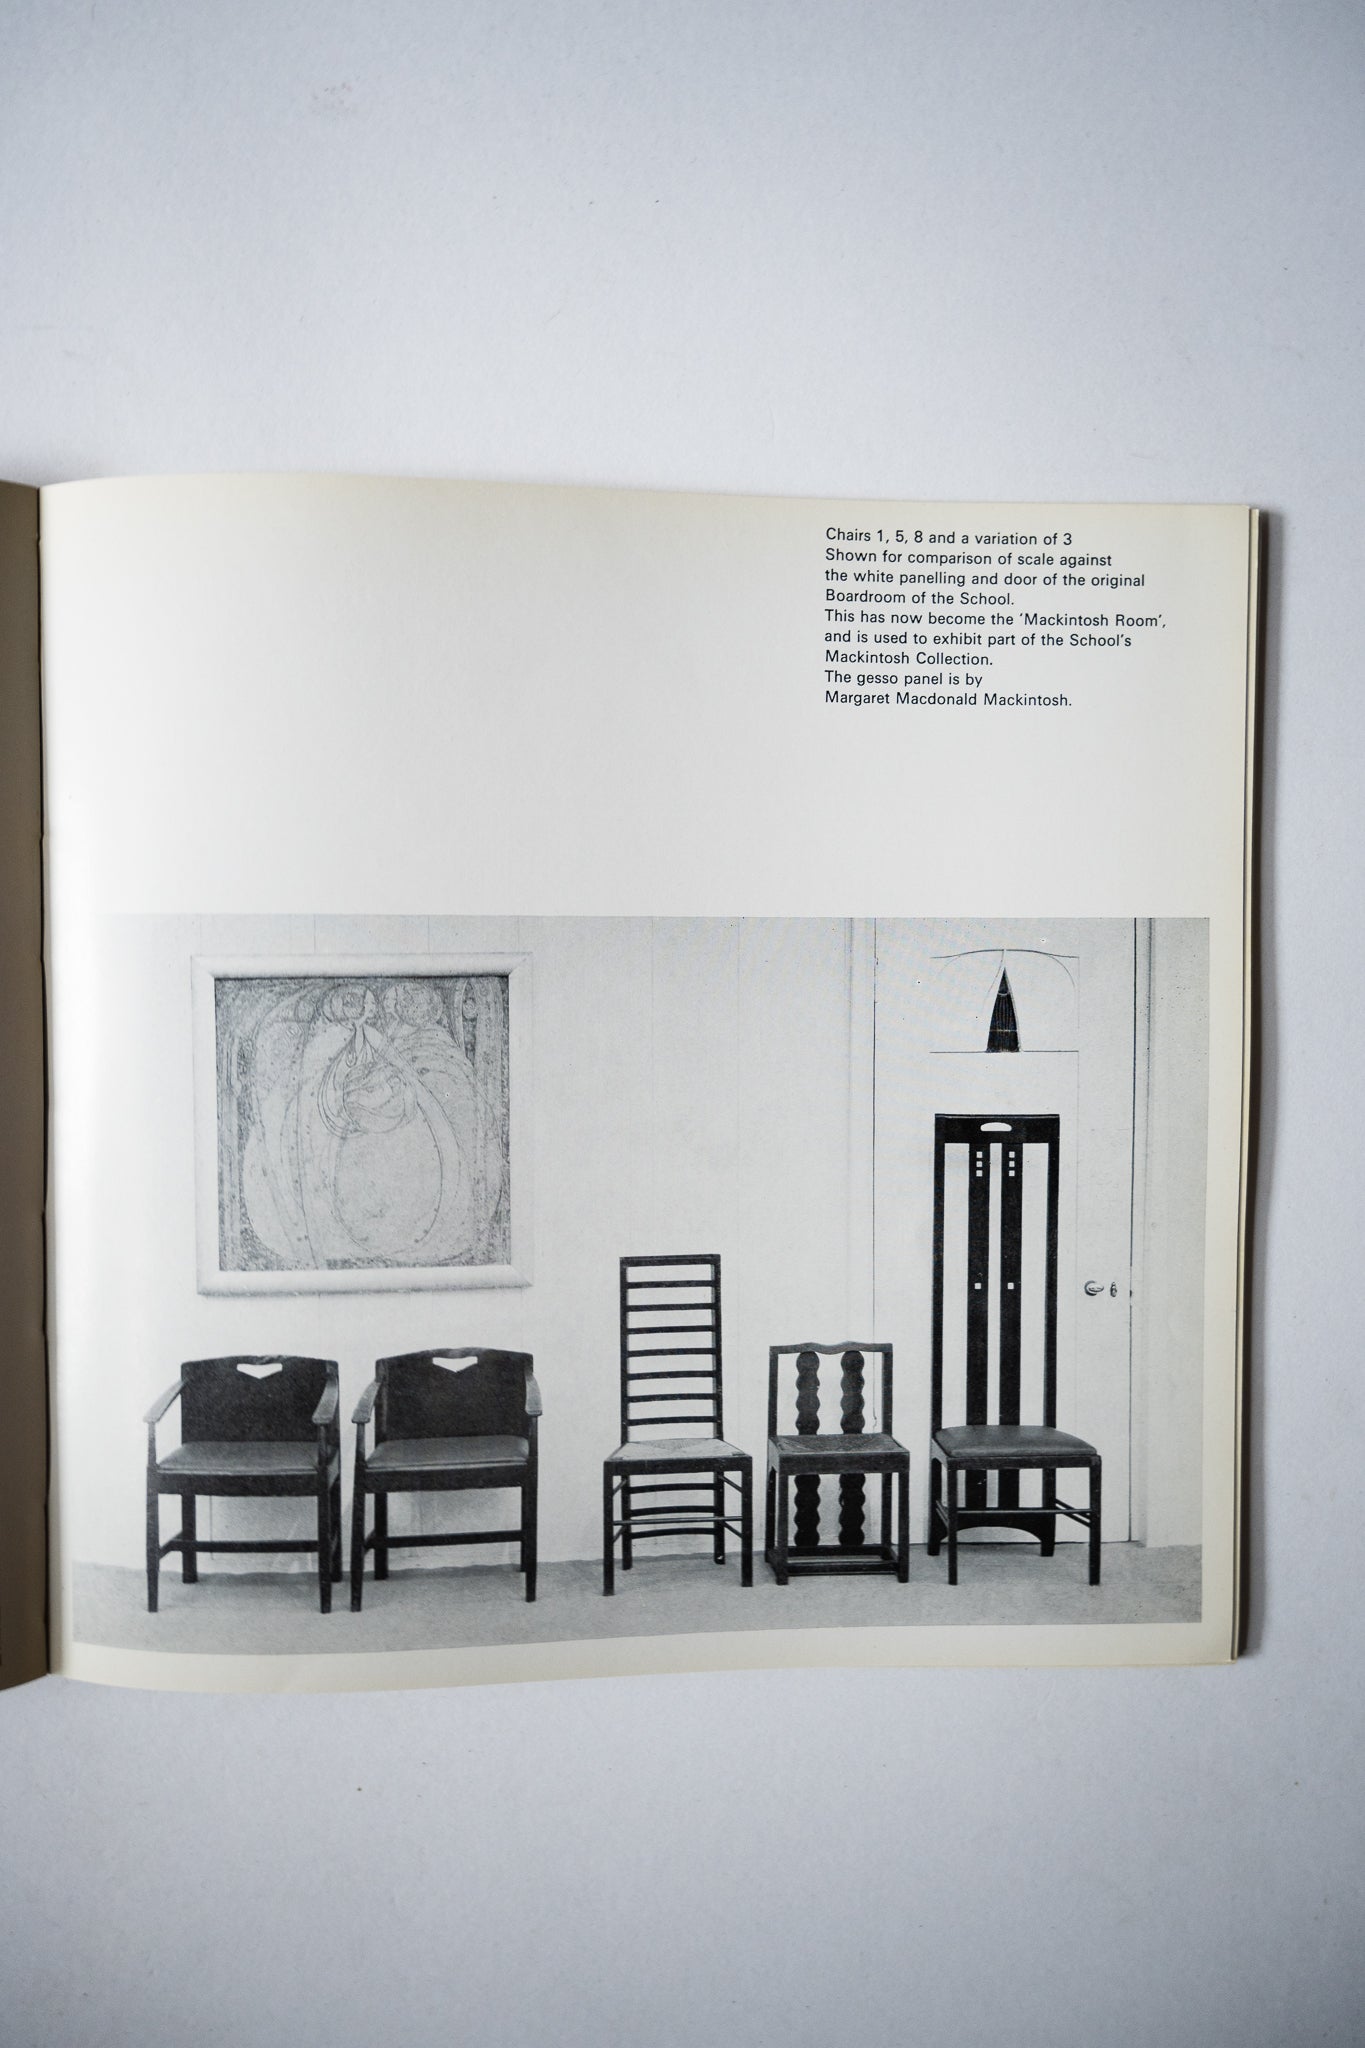 Some Examples of Furniture by Charles Rennie Mackintosh: In The Glasgow School of Art Collection, Glasgow School of Art, 1968